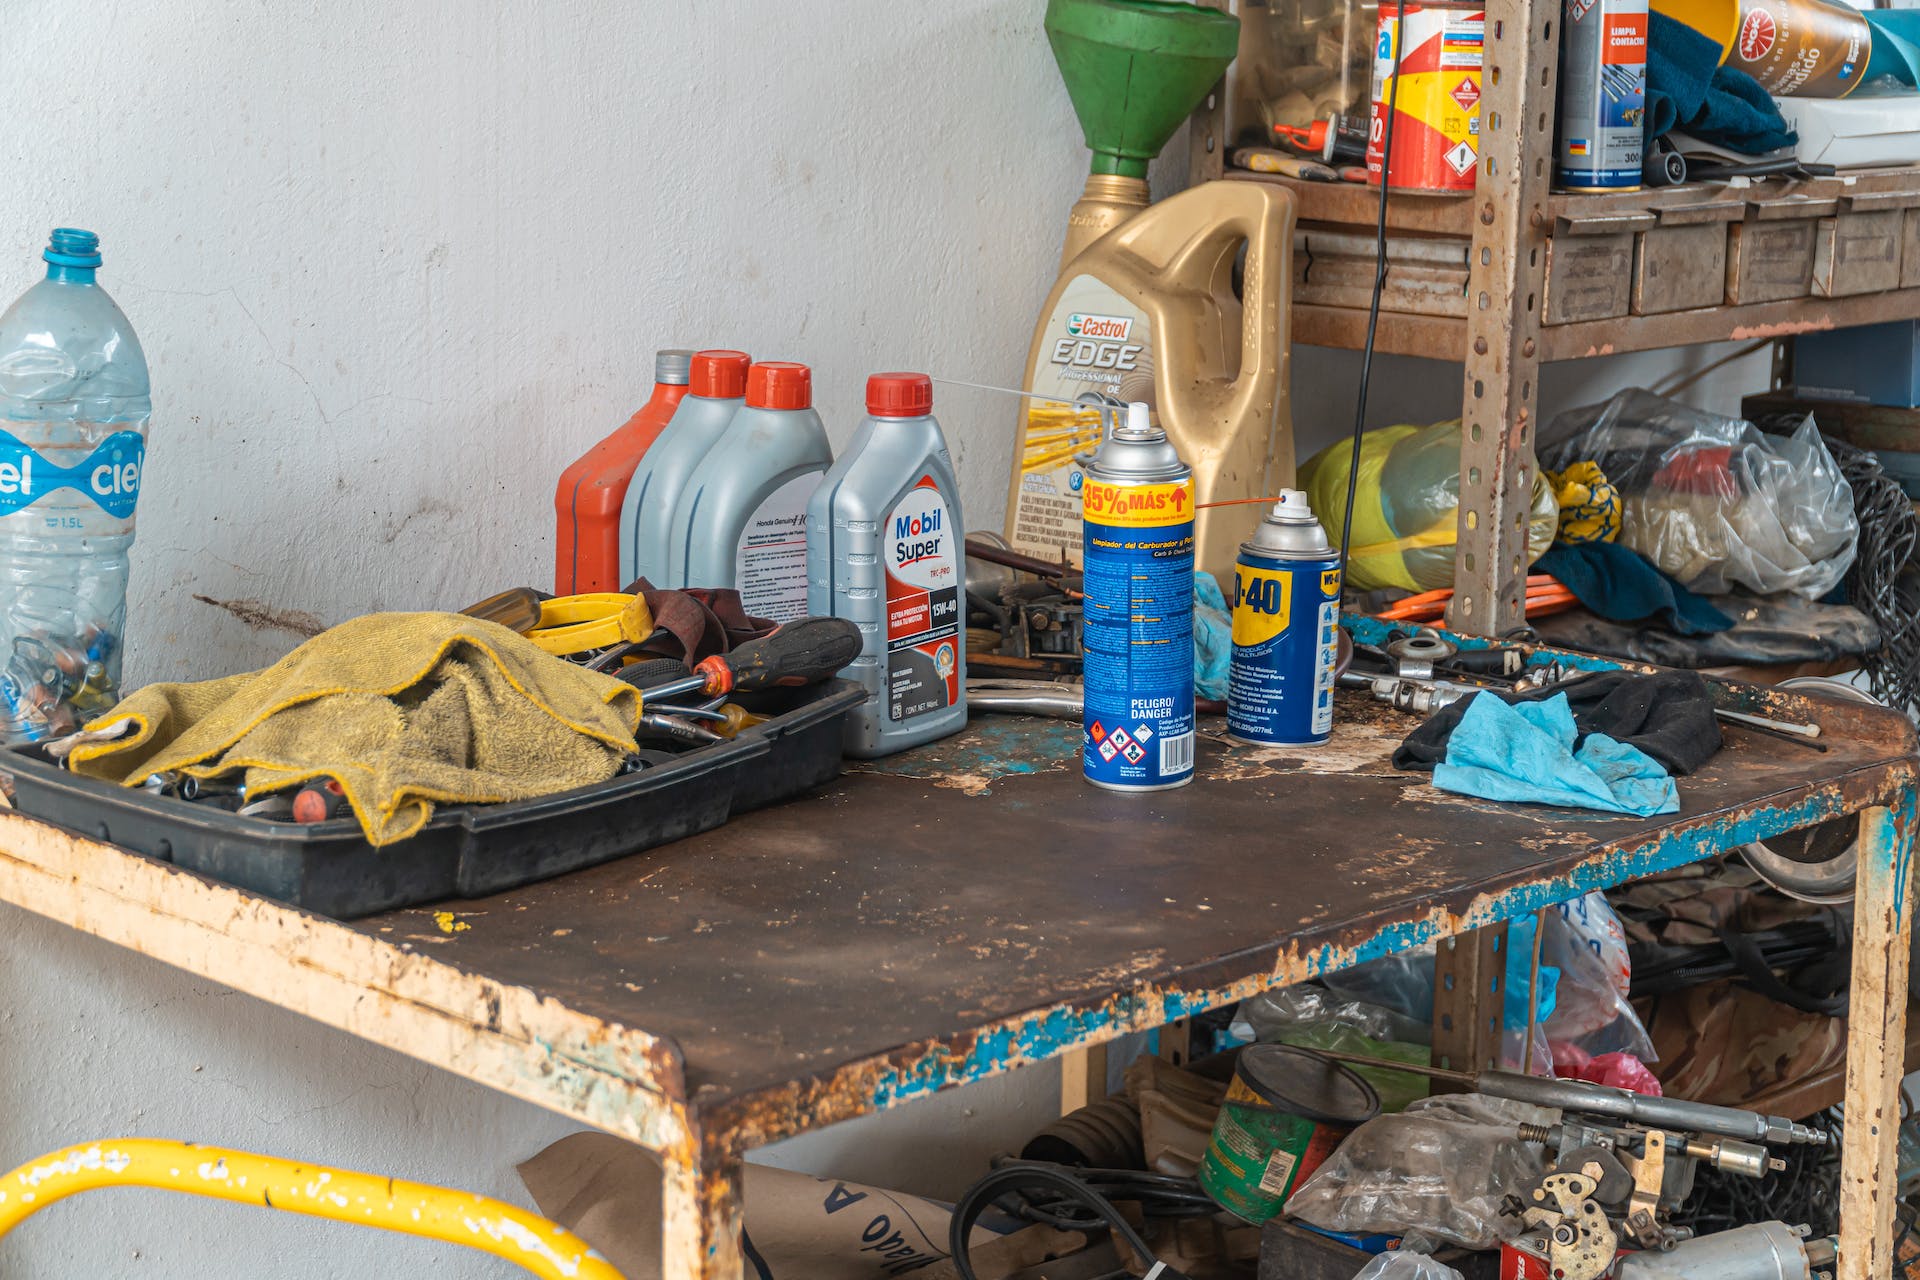 A messy table with engine oils | Source: Pexels